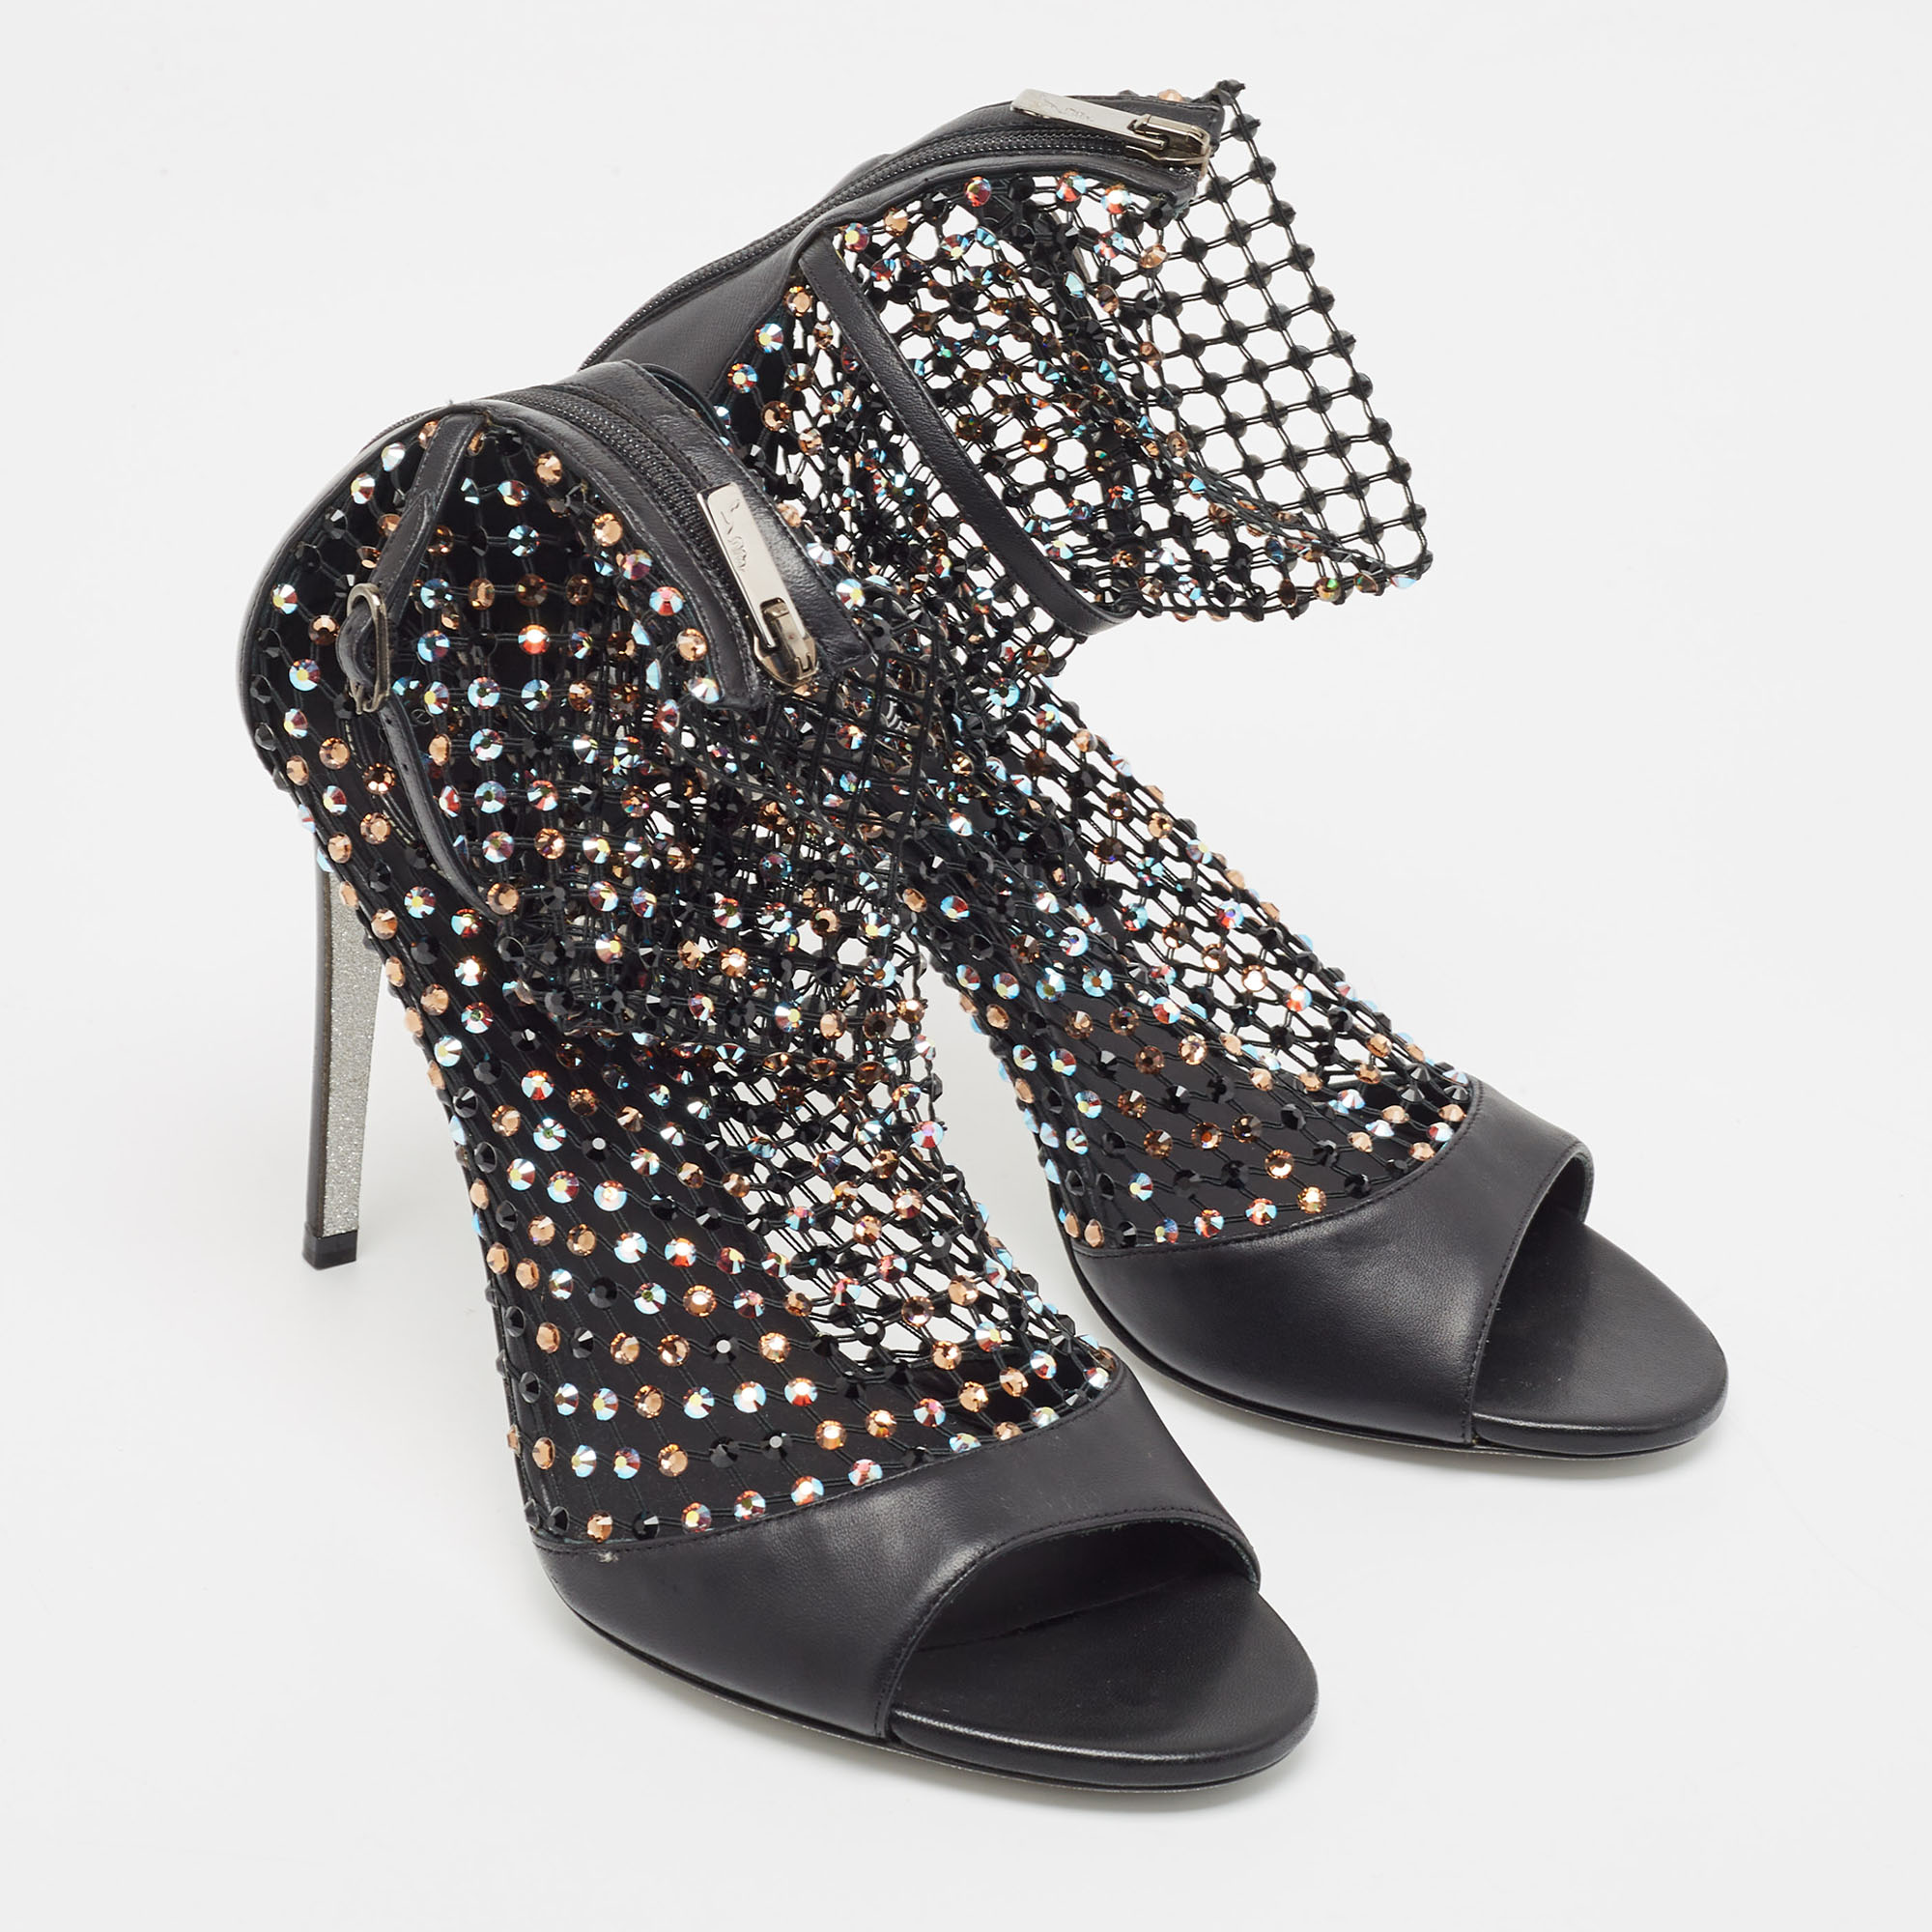 Rene Caovilla Black Leather And Crystal Embellished Mesh Galaxia Sandals Size 40